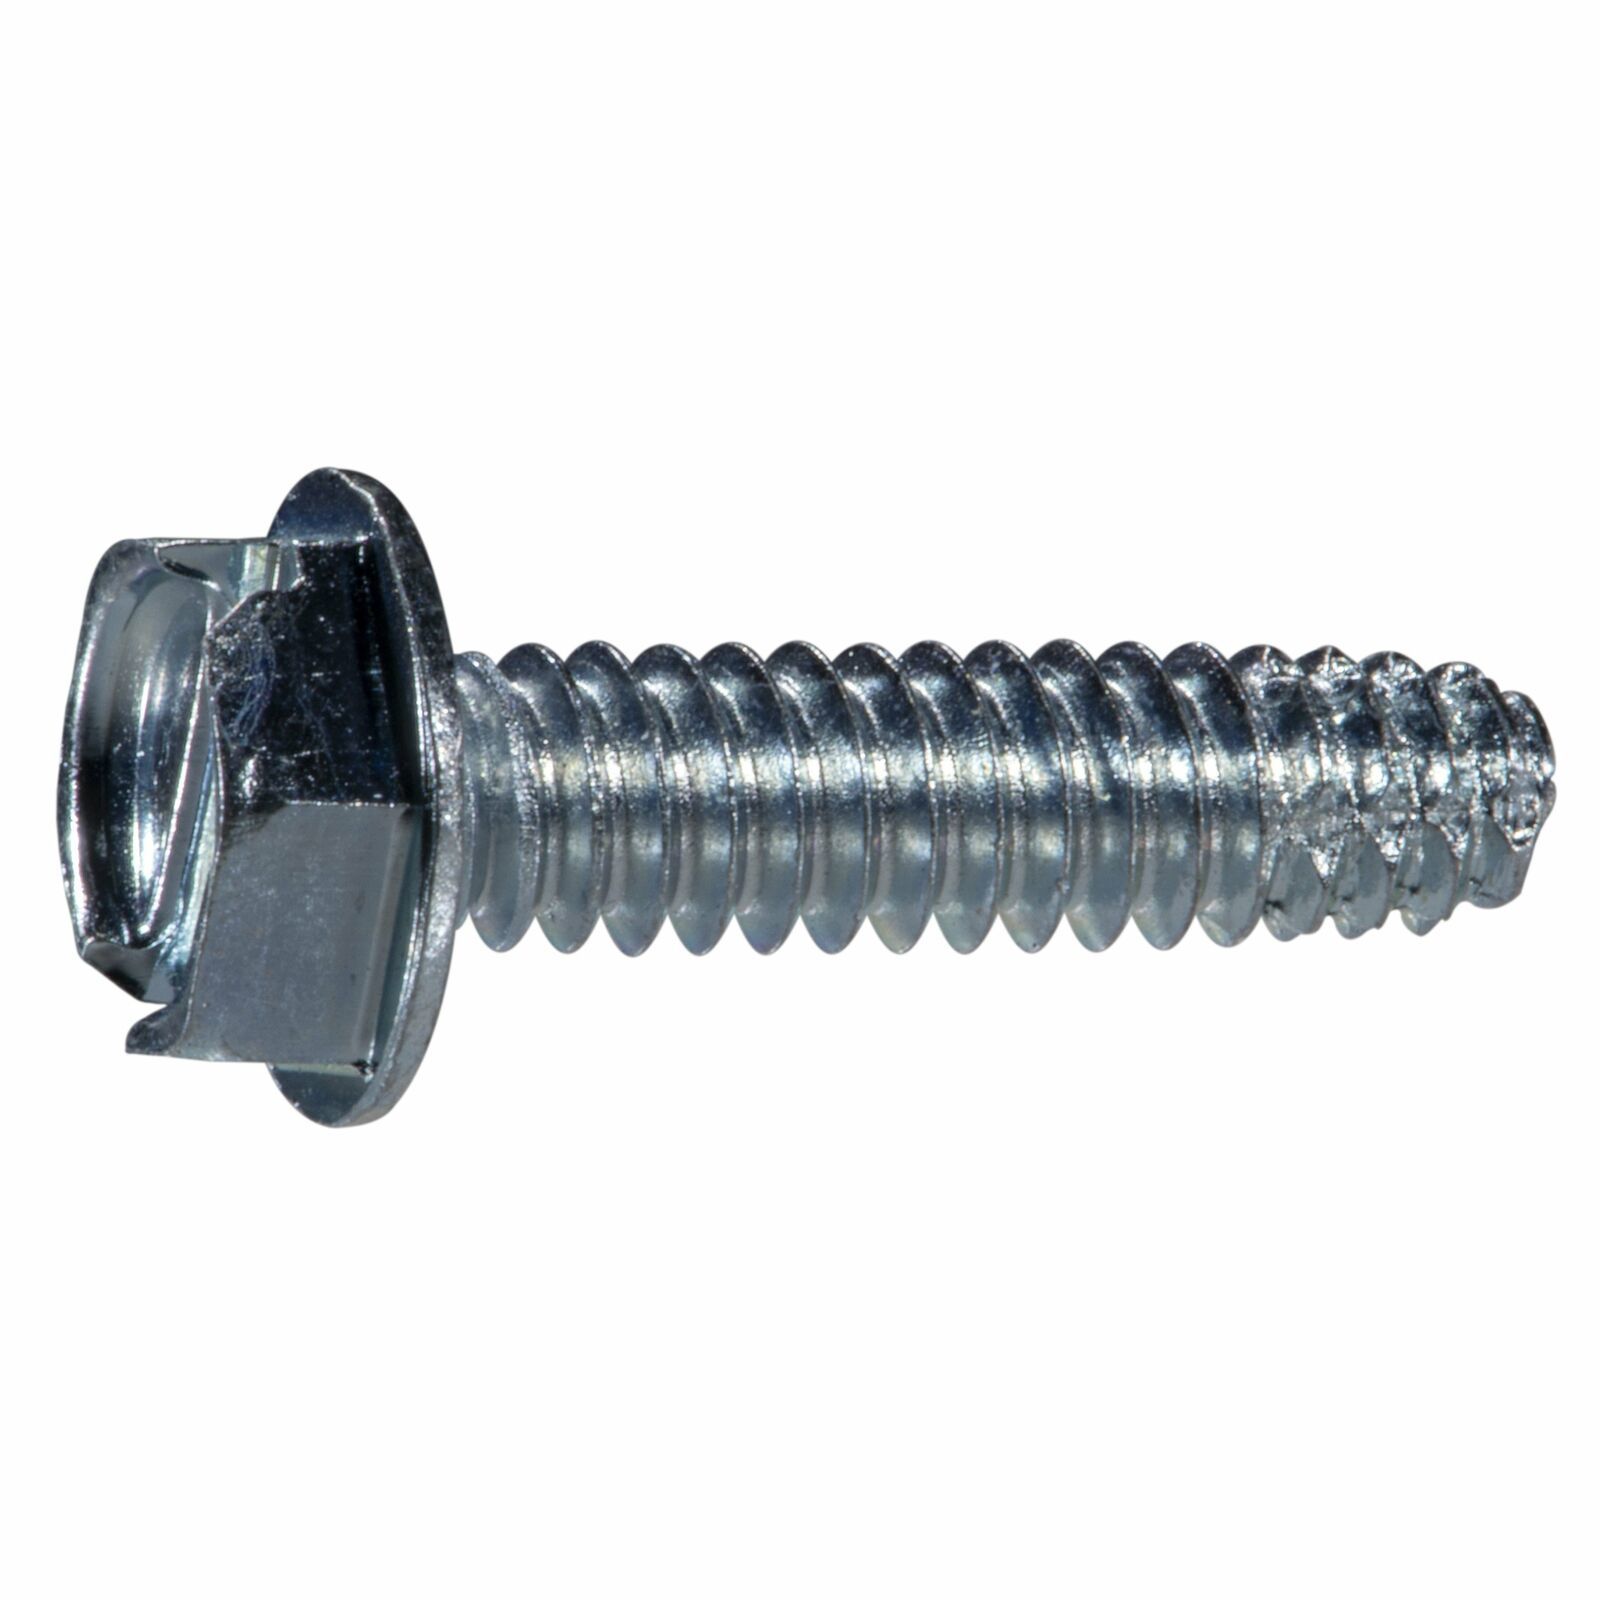 SHEET METAL SCREW STAINLESS #10 X 2-1/2" PHILLIPS OVAL HEAD PACK OF 10 